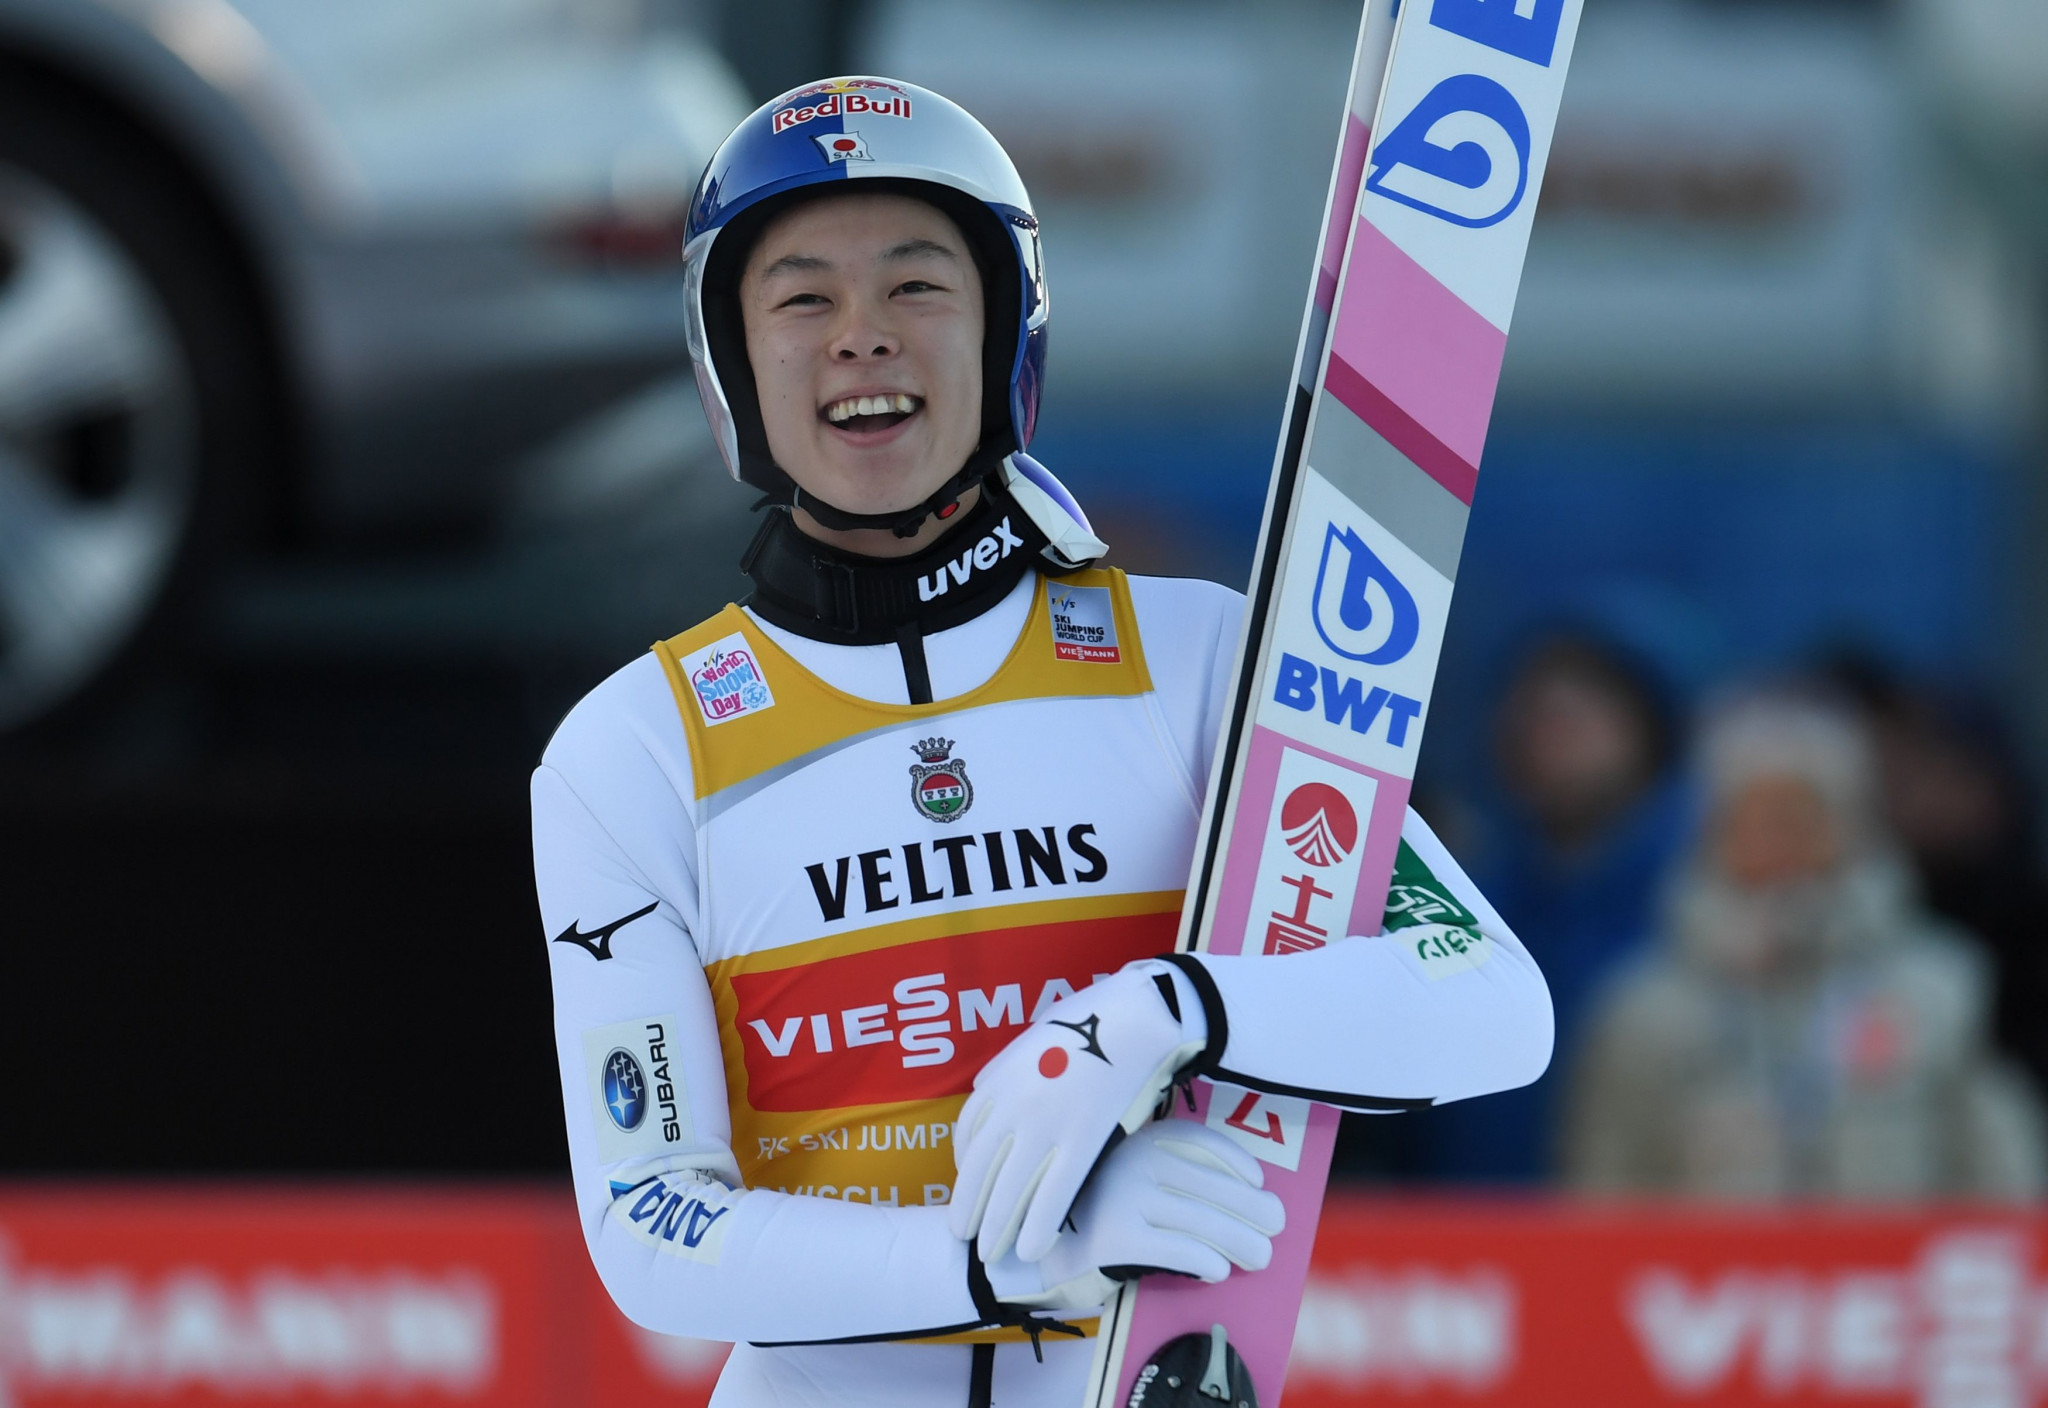 The unbeaten record of Japan's Ryoyu Kobayashi in the Four Hills Tournament came to an end in Garmisch-Partenkirchen as he had to settle for fourth place ©Getty Images